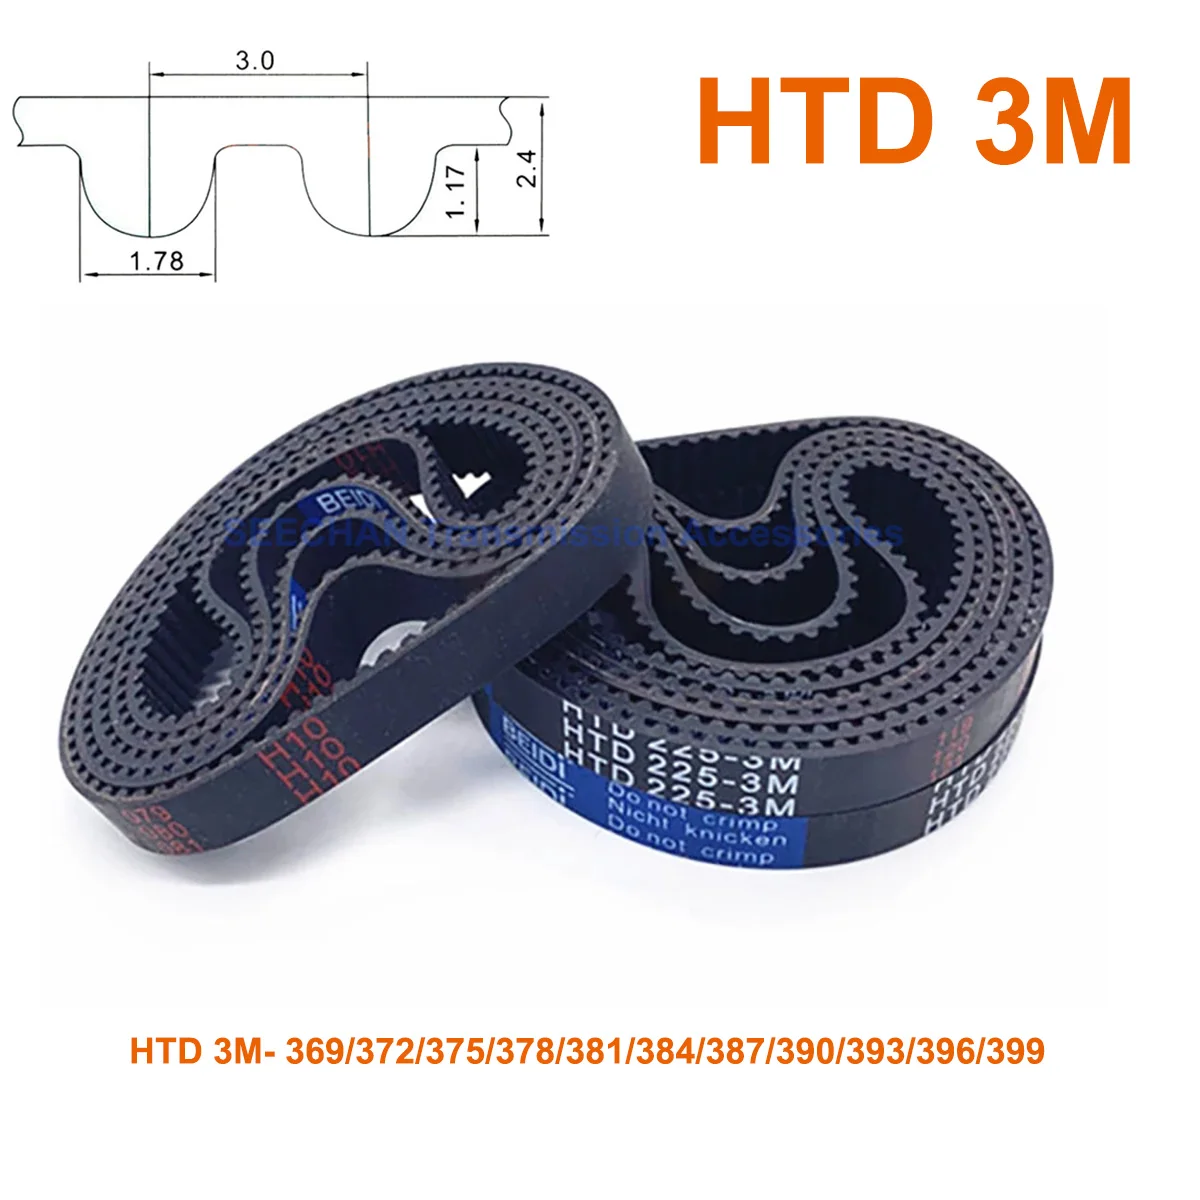 

Closed Loop HTD 3M Rubber Synchronous Timing Belt Width 6 10 15 20mm Perimeter 369 372 375 378 381 384 387 390 393 396 399mm